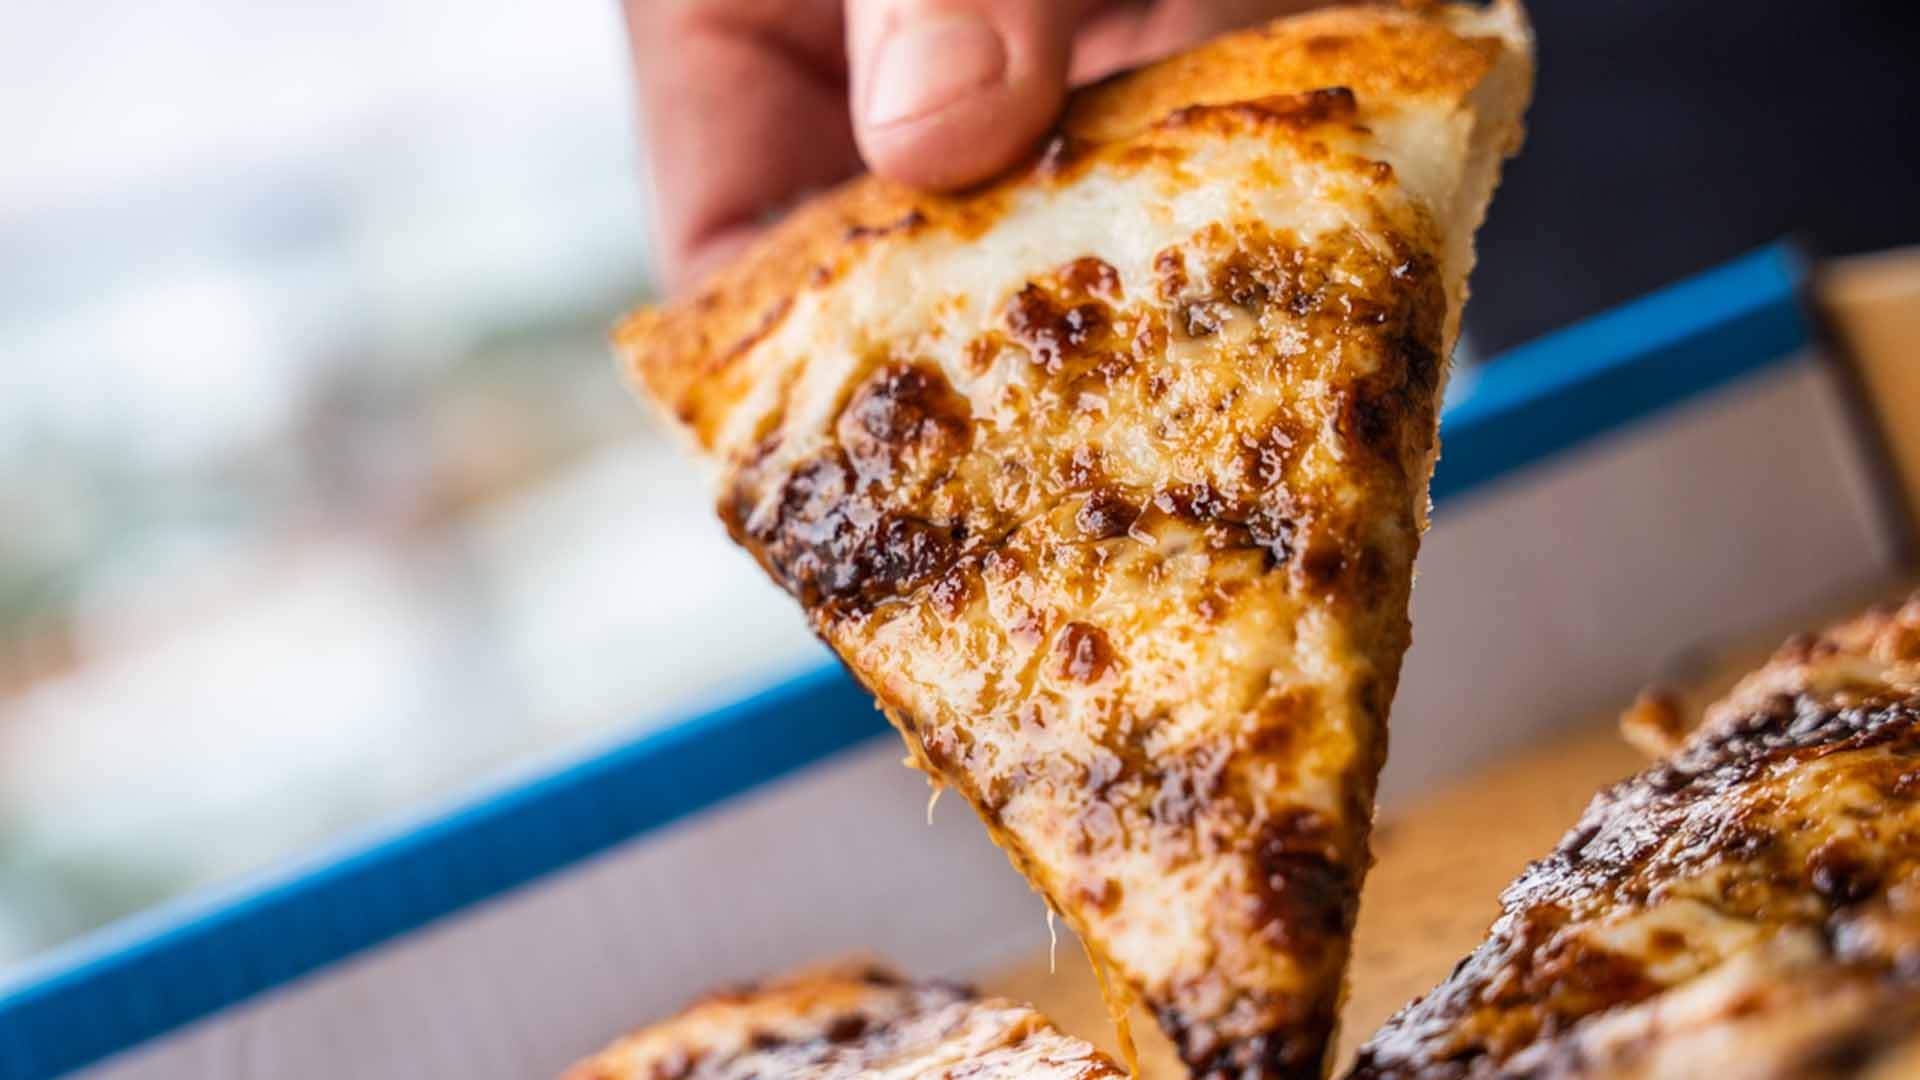 Vegemite and Cheese Pizza Now Exists Thanks to Domino's New Limited-Edition Menu Addition